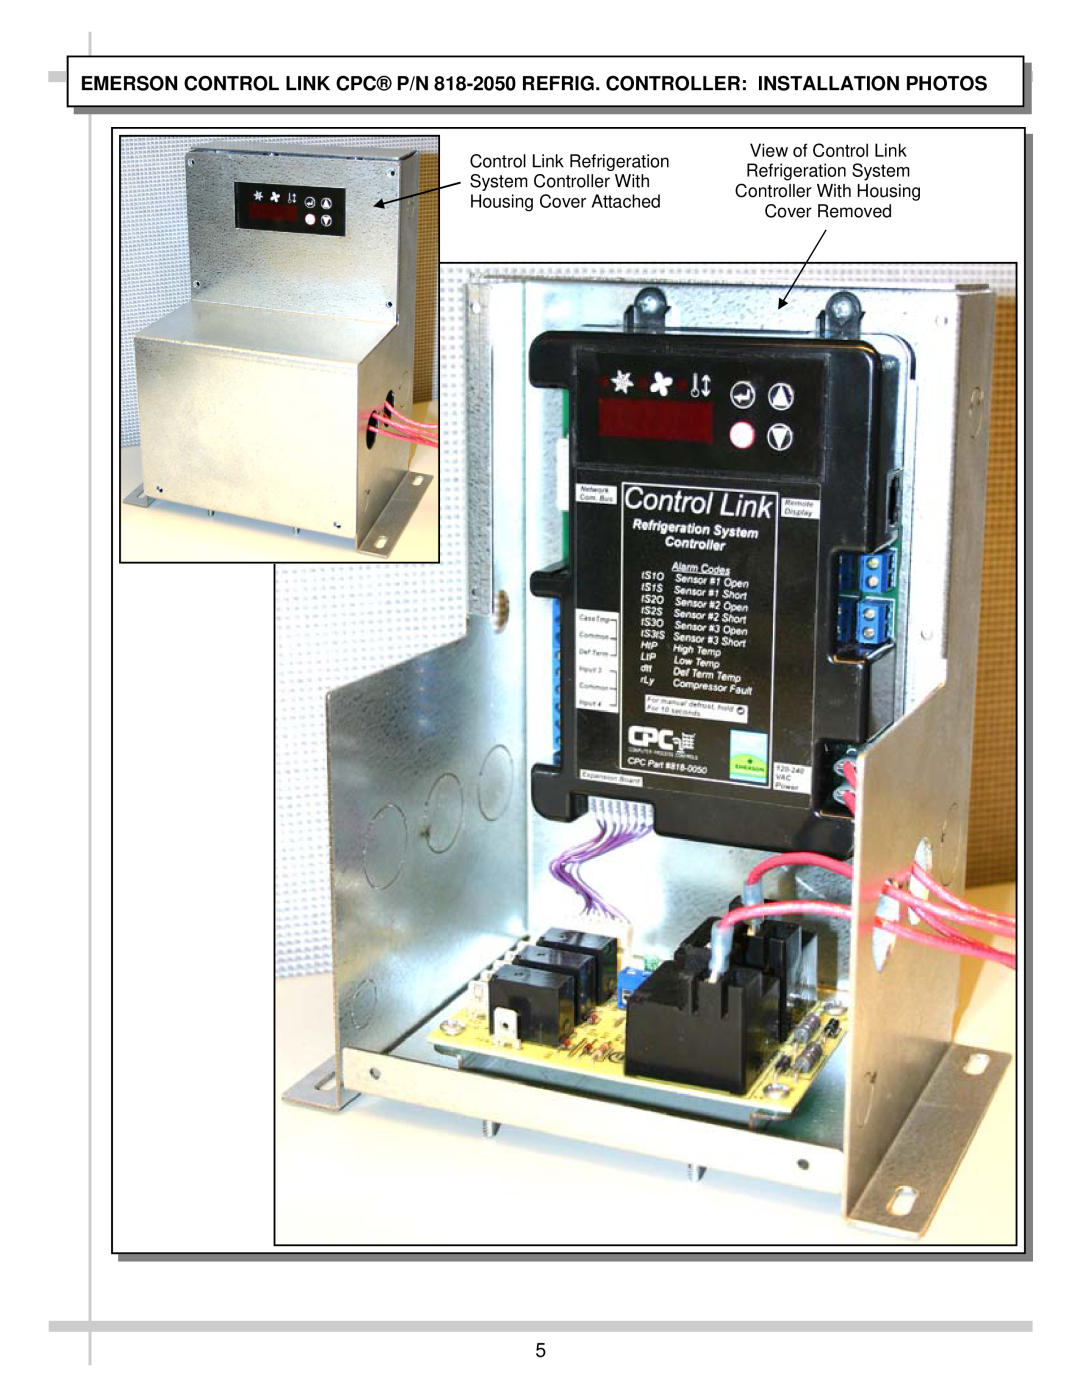 Emerson CL-RSC manual Control Link Refrigeration, View of Control Link, Refrigeration System, System Controller With 